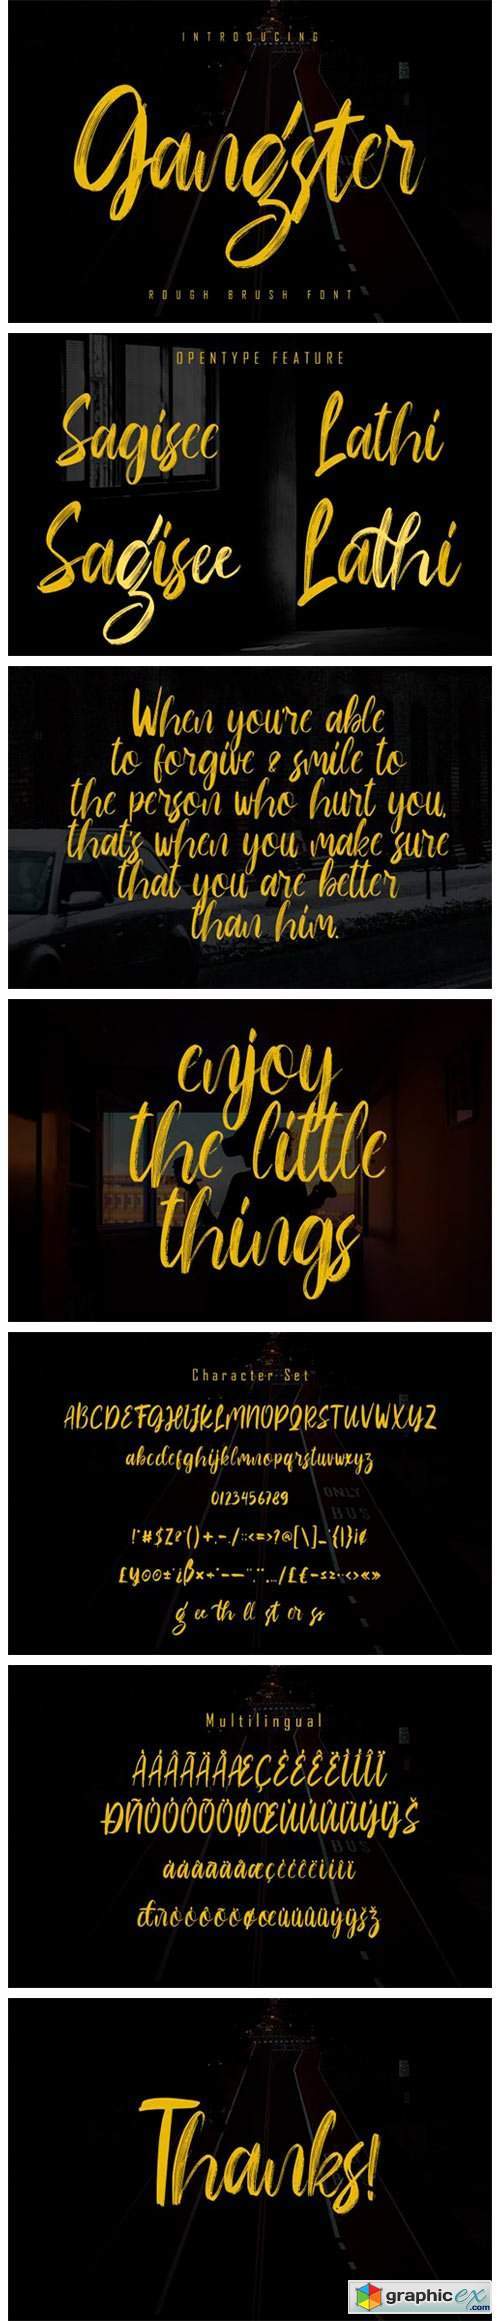 ll brown font free download